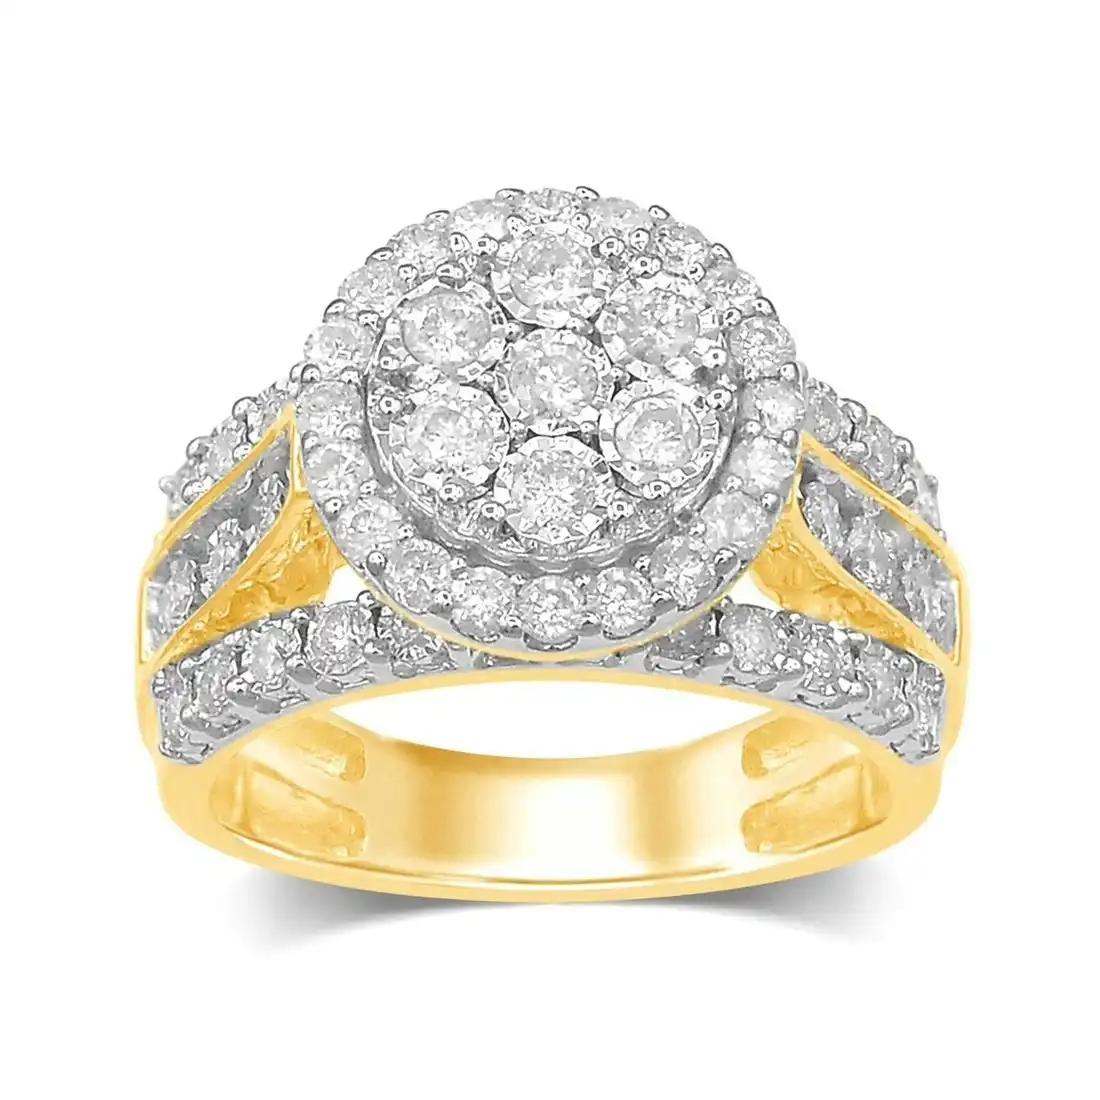 Brilliant Illusion Halo Cluster Ring with 1.00ct of Diamonds in 9ct Yellow Gold